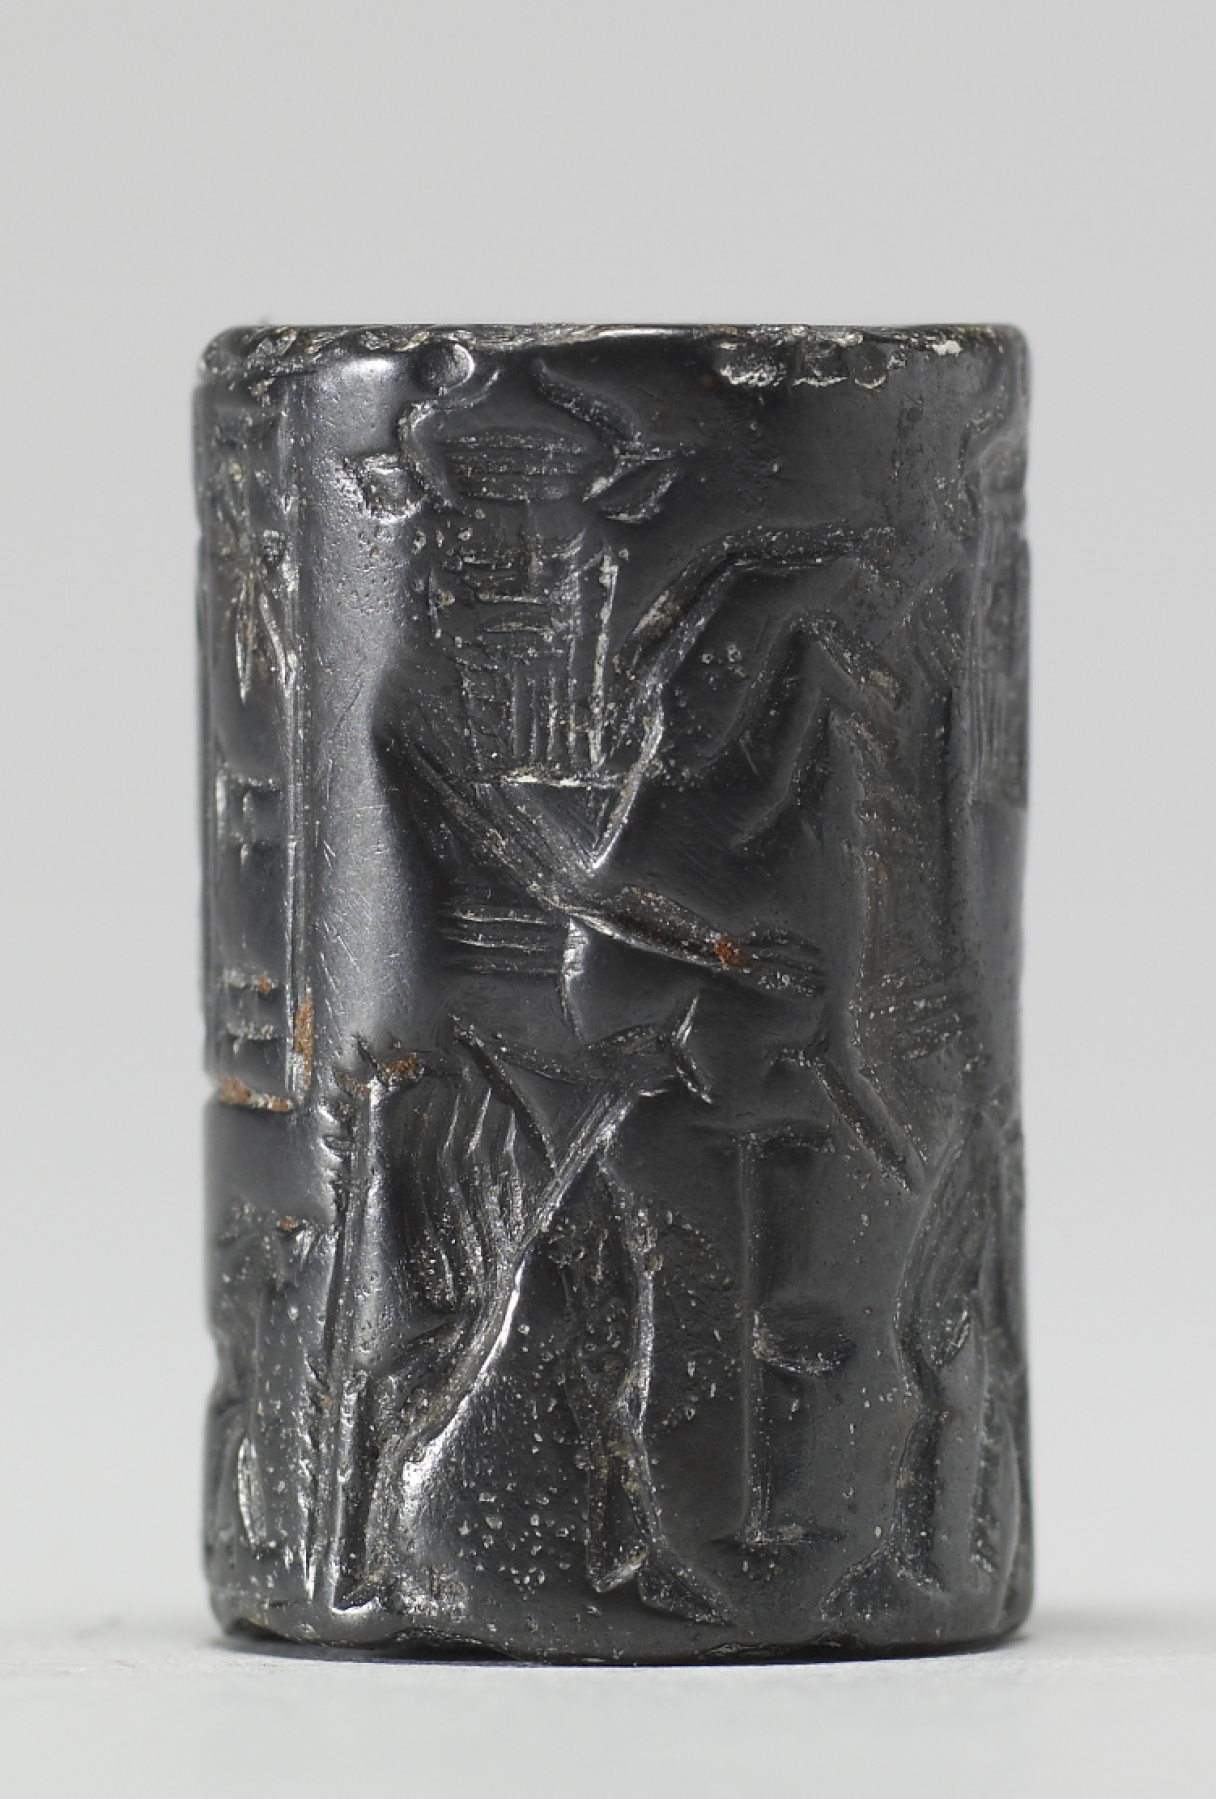 Image for Cylinder Seal with Enkidu Vanquishing the Bull of Heaven